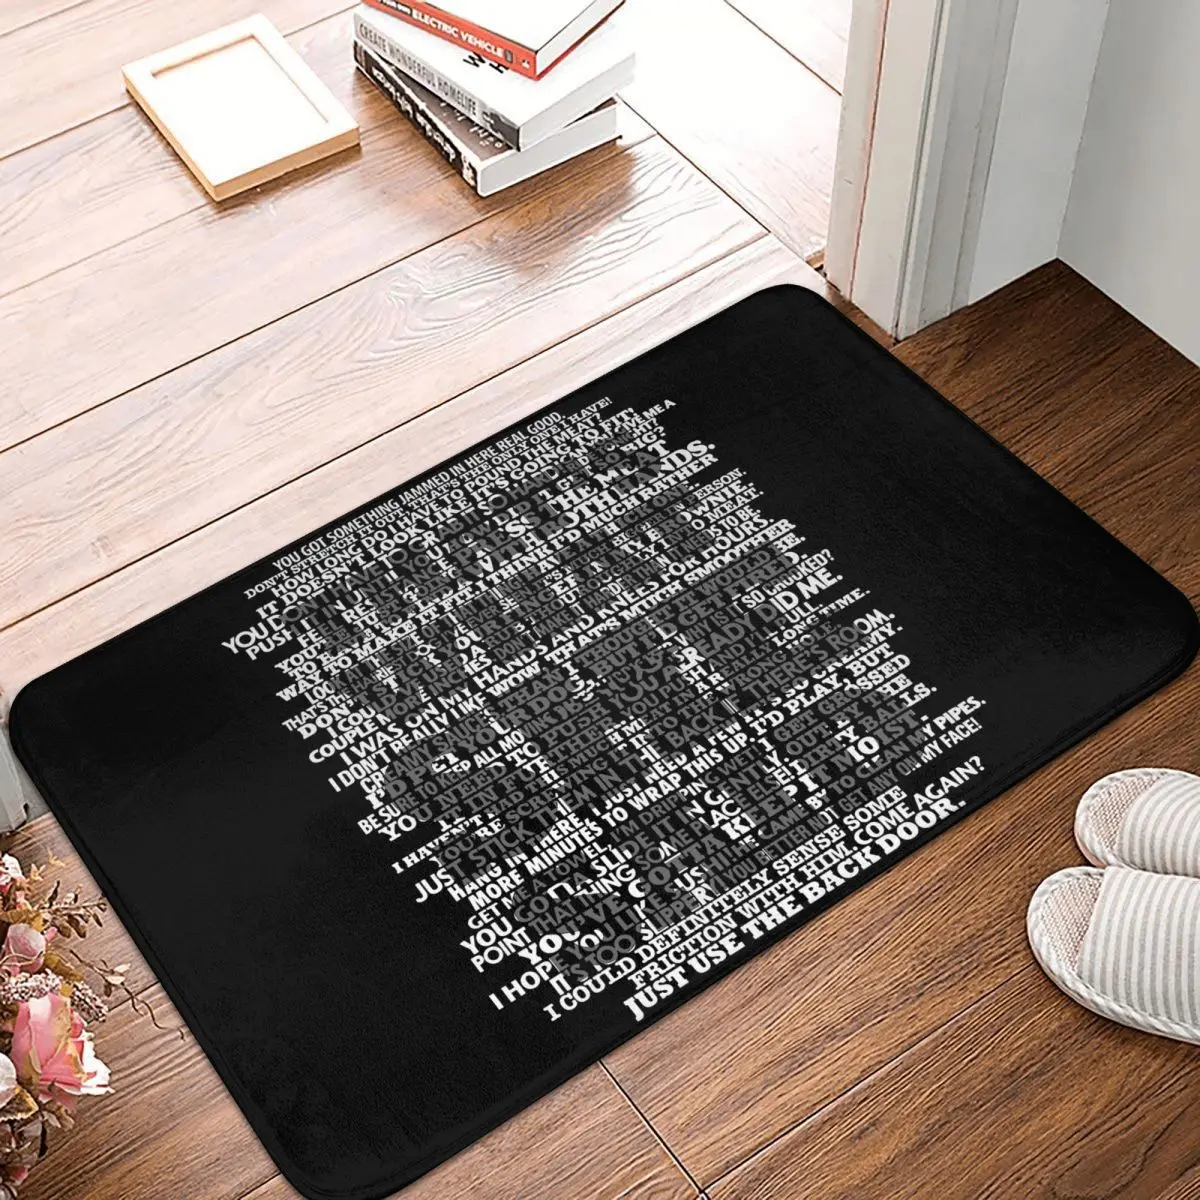 

The Office Michael Scott Comedy Bedroom Mat That's What SHE Said! Doormat Kitchen Carpet Balcony Rug Home Decor